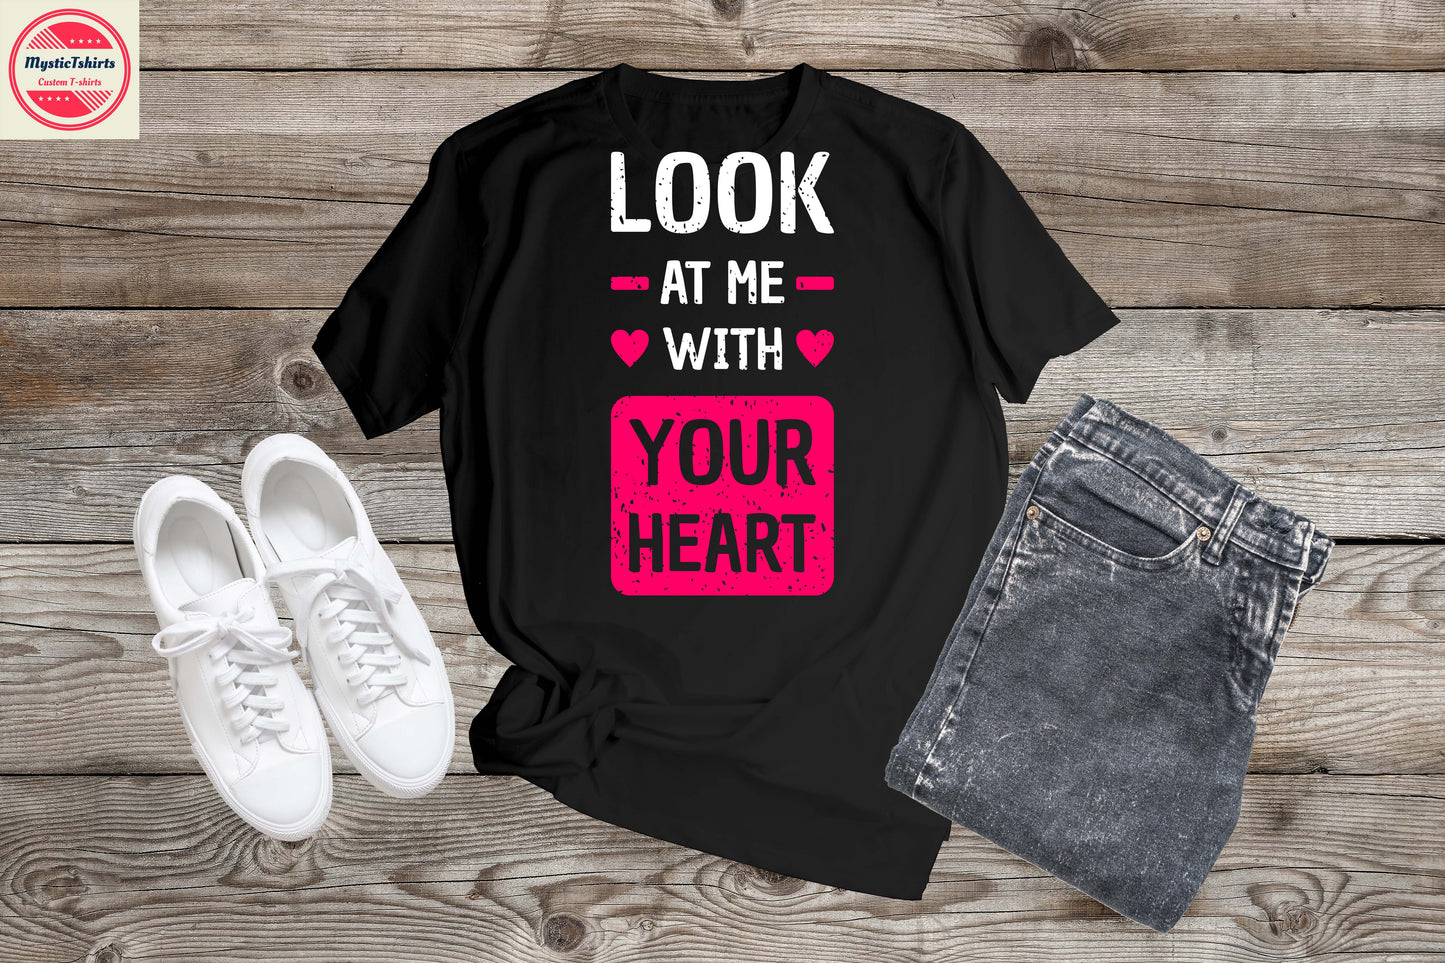 307. LOVE/VALENTINE, LOOK AT ME WITH YOUR HEART Custom Made Shirt, Personalized T-Shirt, Custom Text, Make Your Own Shirt, Custom Tee